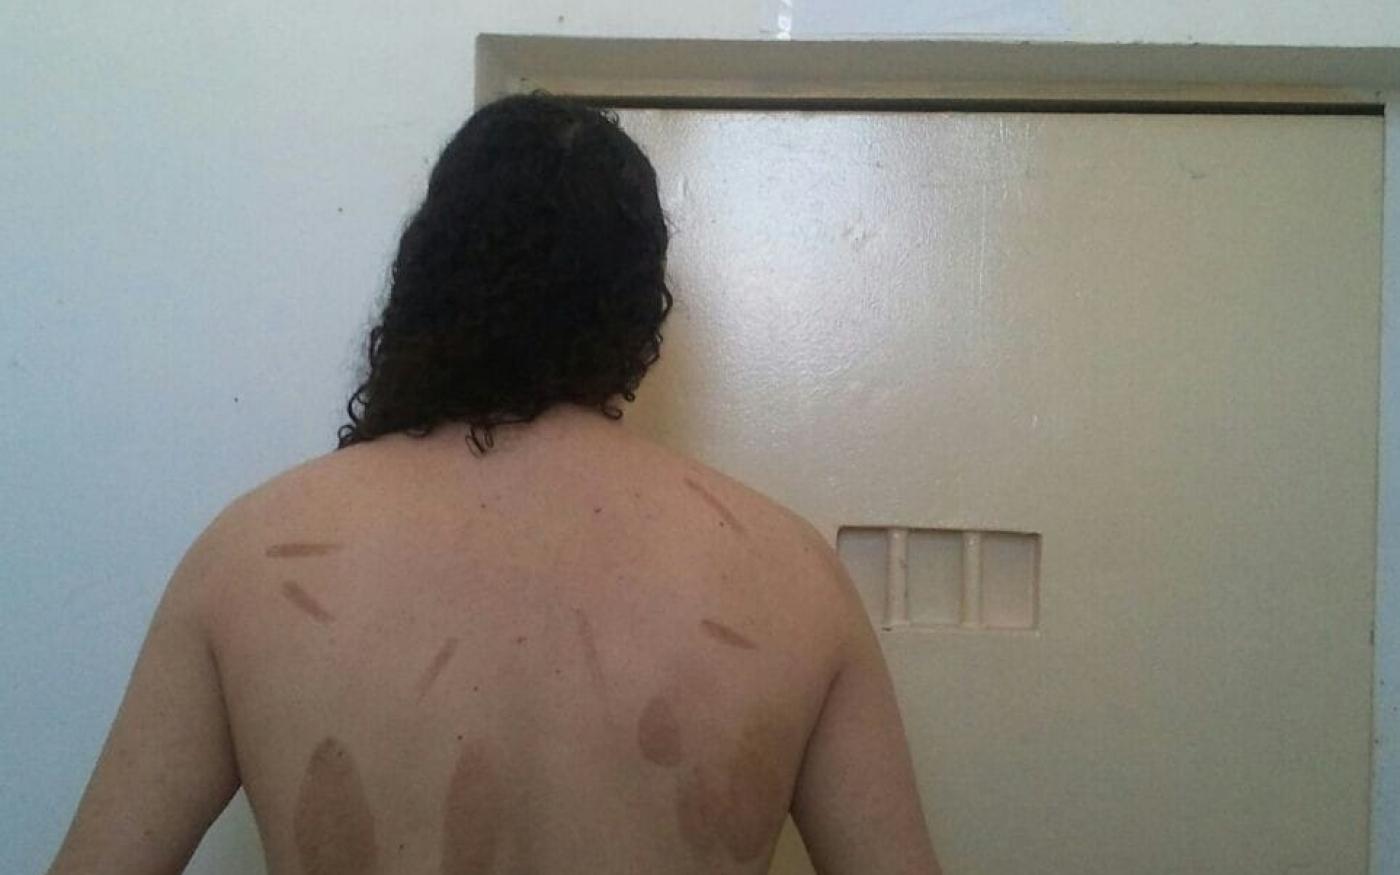 In prison in Morocco, Mohamed Hajib was tortured, as shown in this photo, with objects that left burn marks on his back (photo courtesy of Mohamed Hajib)